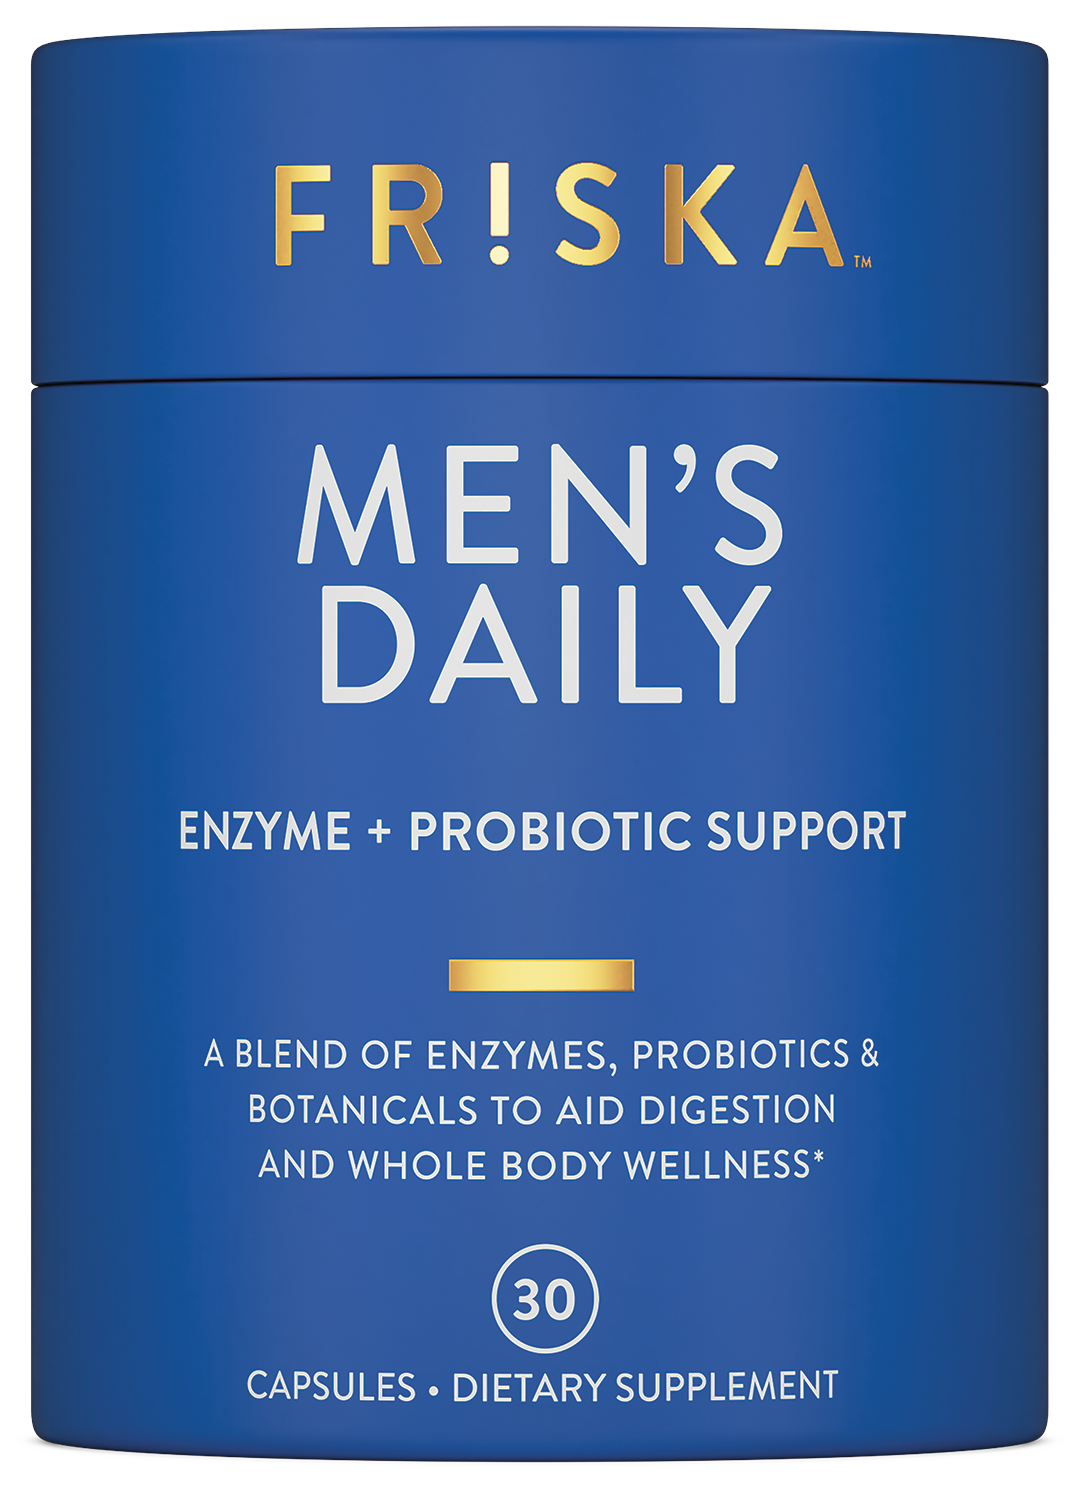 FRISKA Men's Daily Enzyme + Probiotic Support Capsules